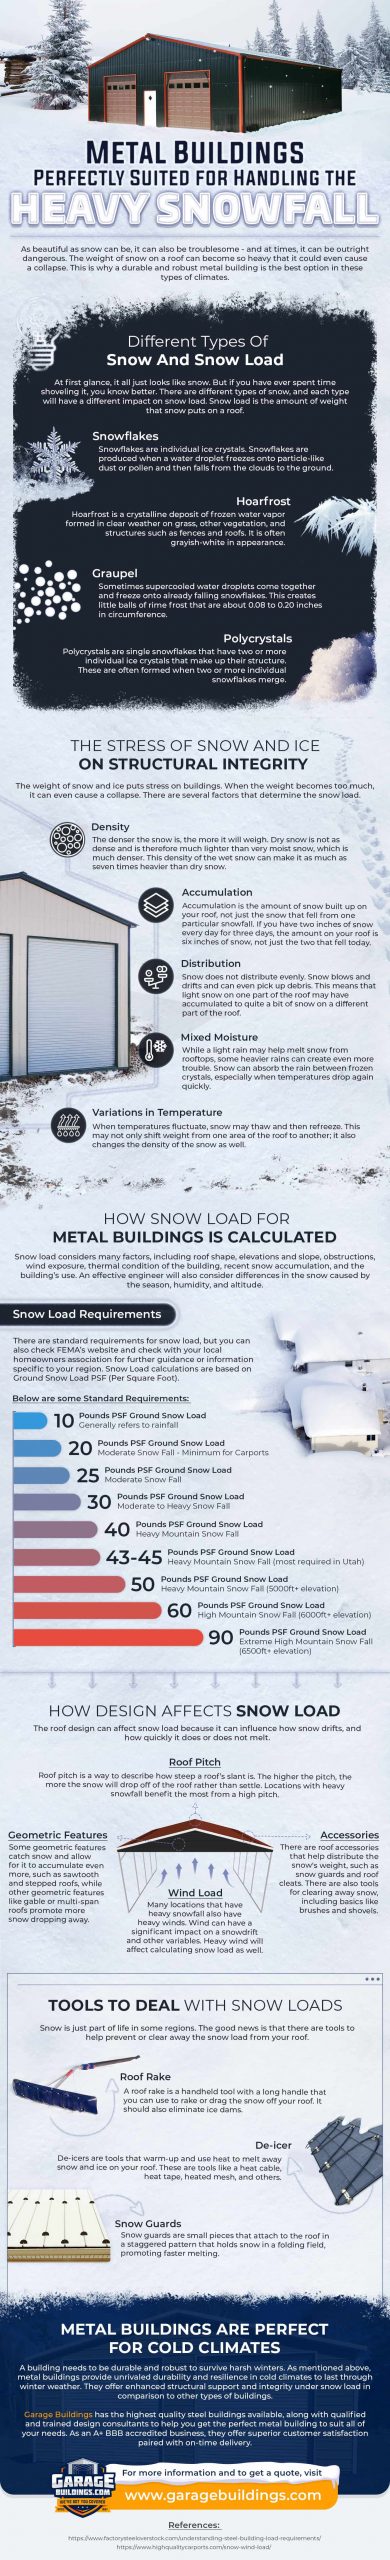 Prefab Metal Buildings - Perfectly Suited for Handling the Heavy Snowfall